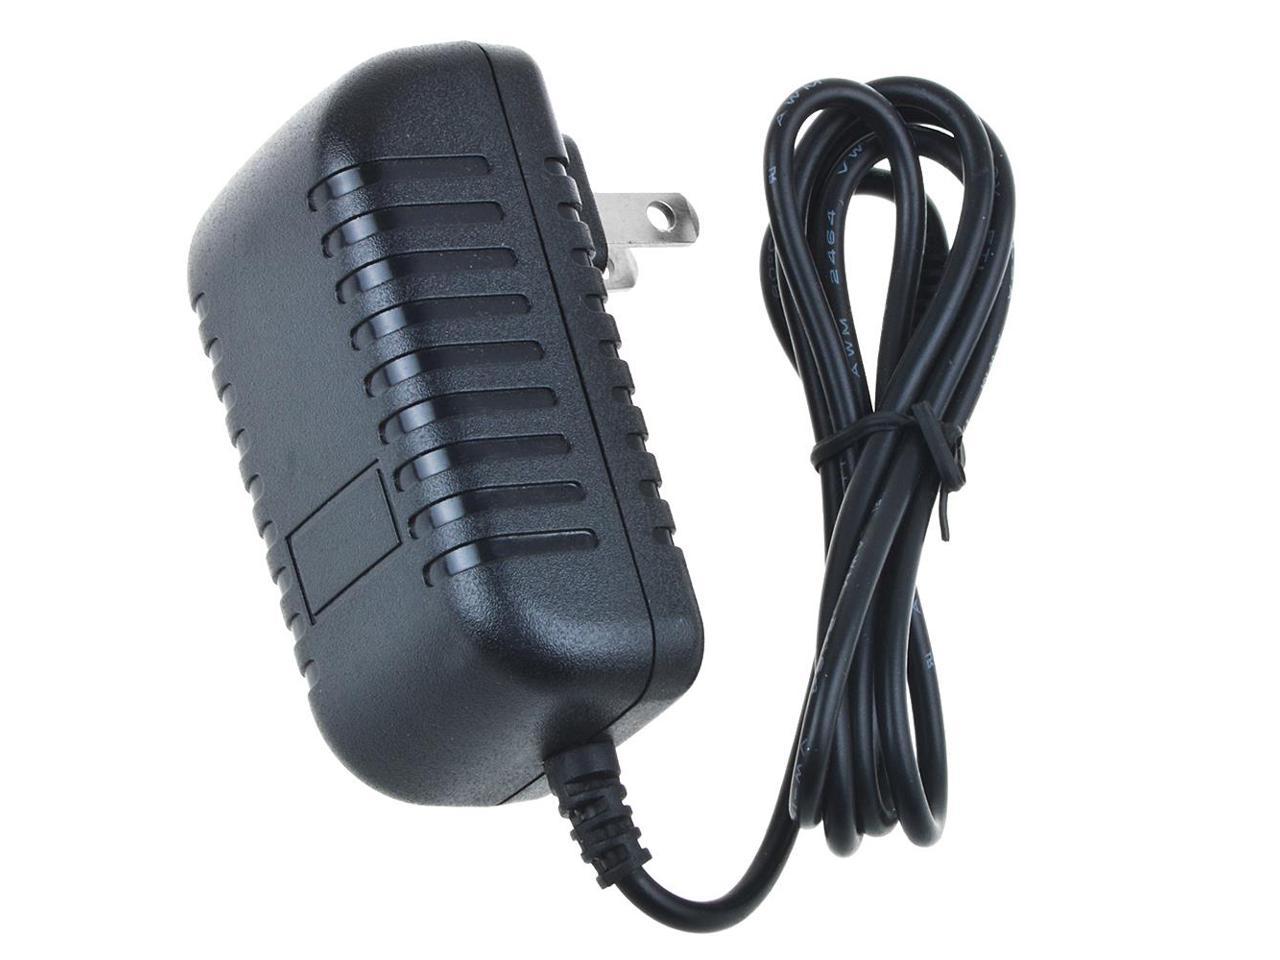 AC Adapter For Sony ICF-2002 ICF-2003 ICF-7600AW Radio Receiver DC Power Supply 